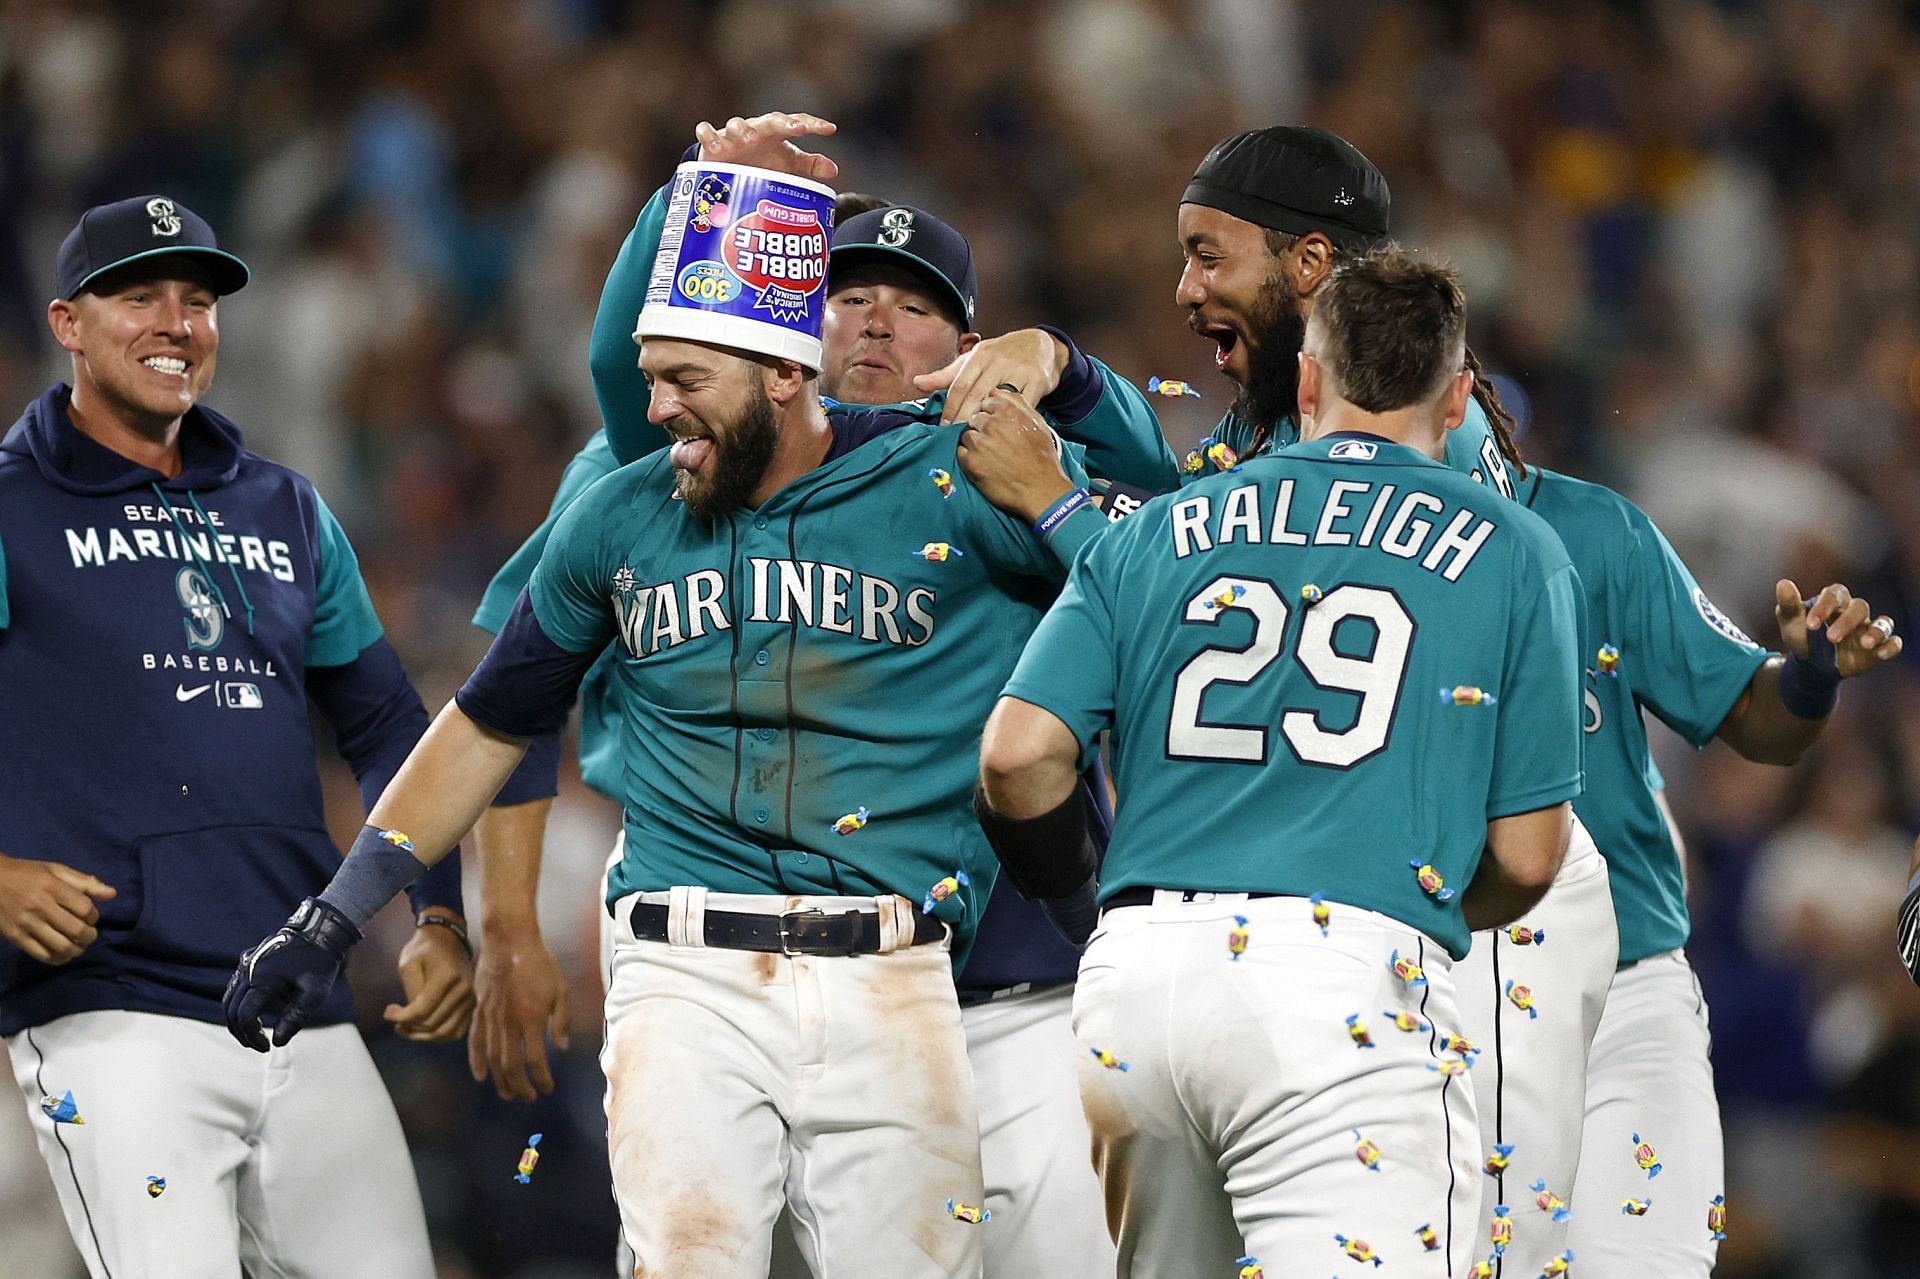 Mariners play Astros hard but lose late, this time 3-2 - Lookout